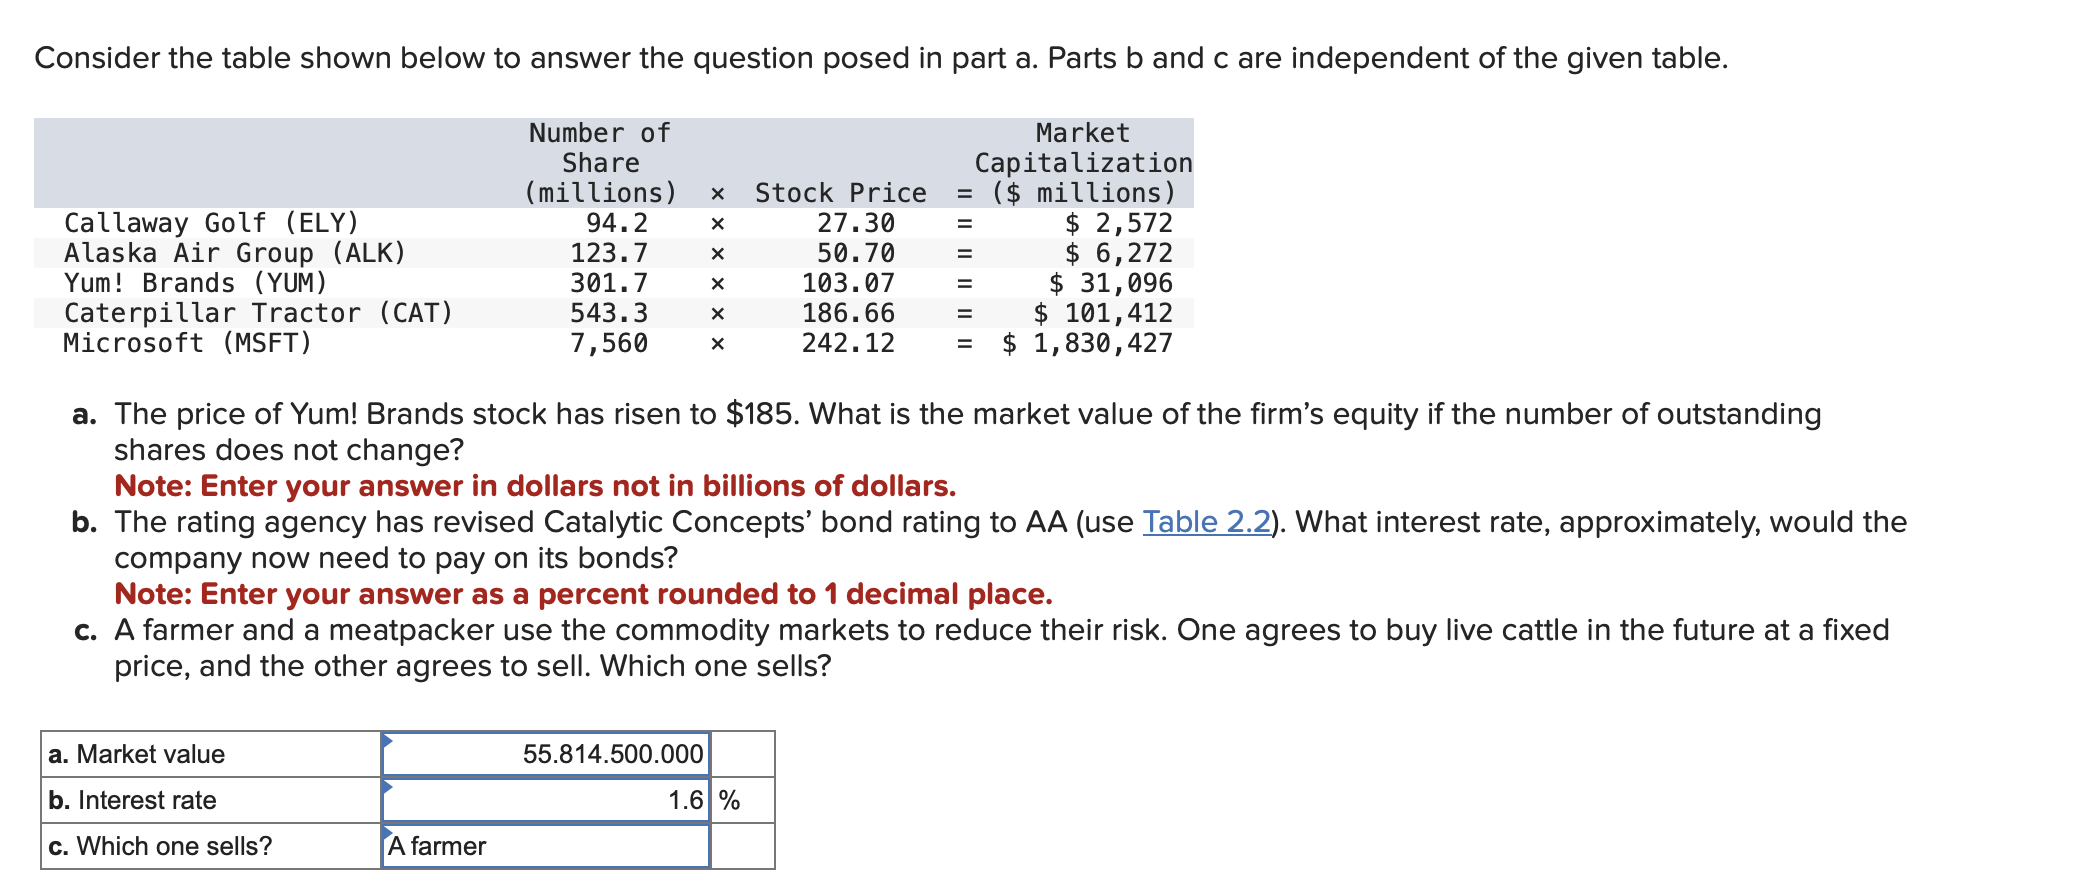 Consider the table shown below to answer the question posed in part a. Parts b and c are independent of the